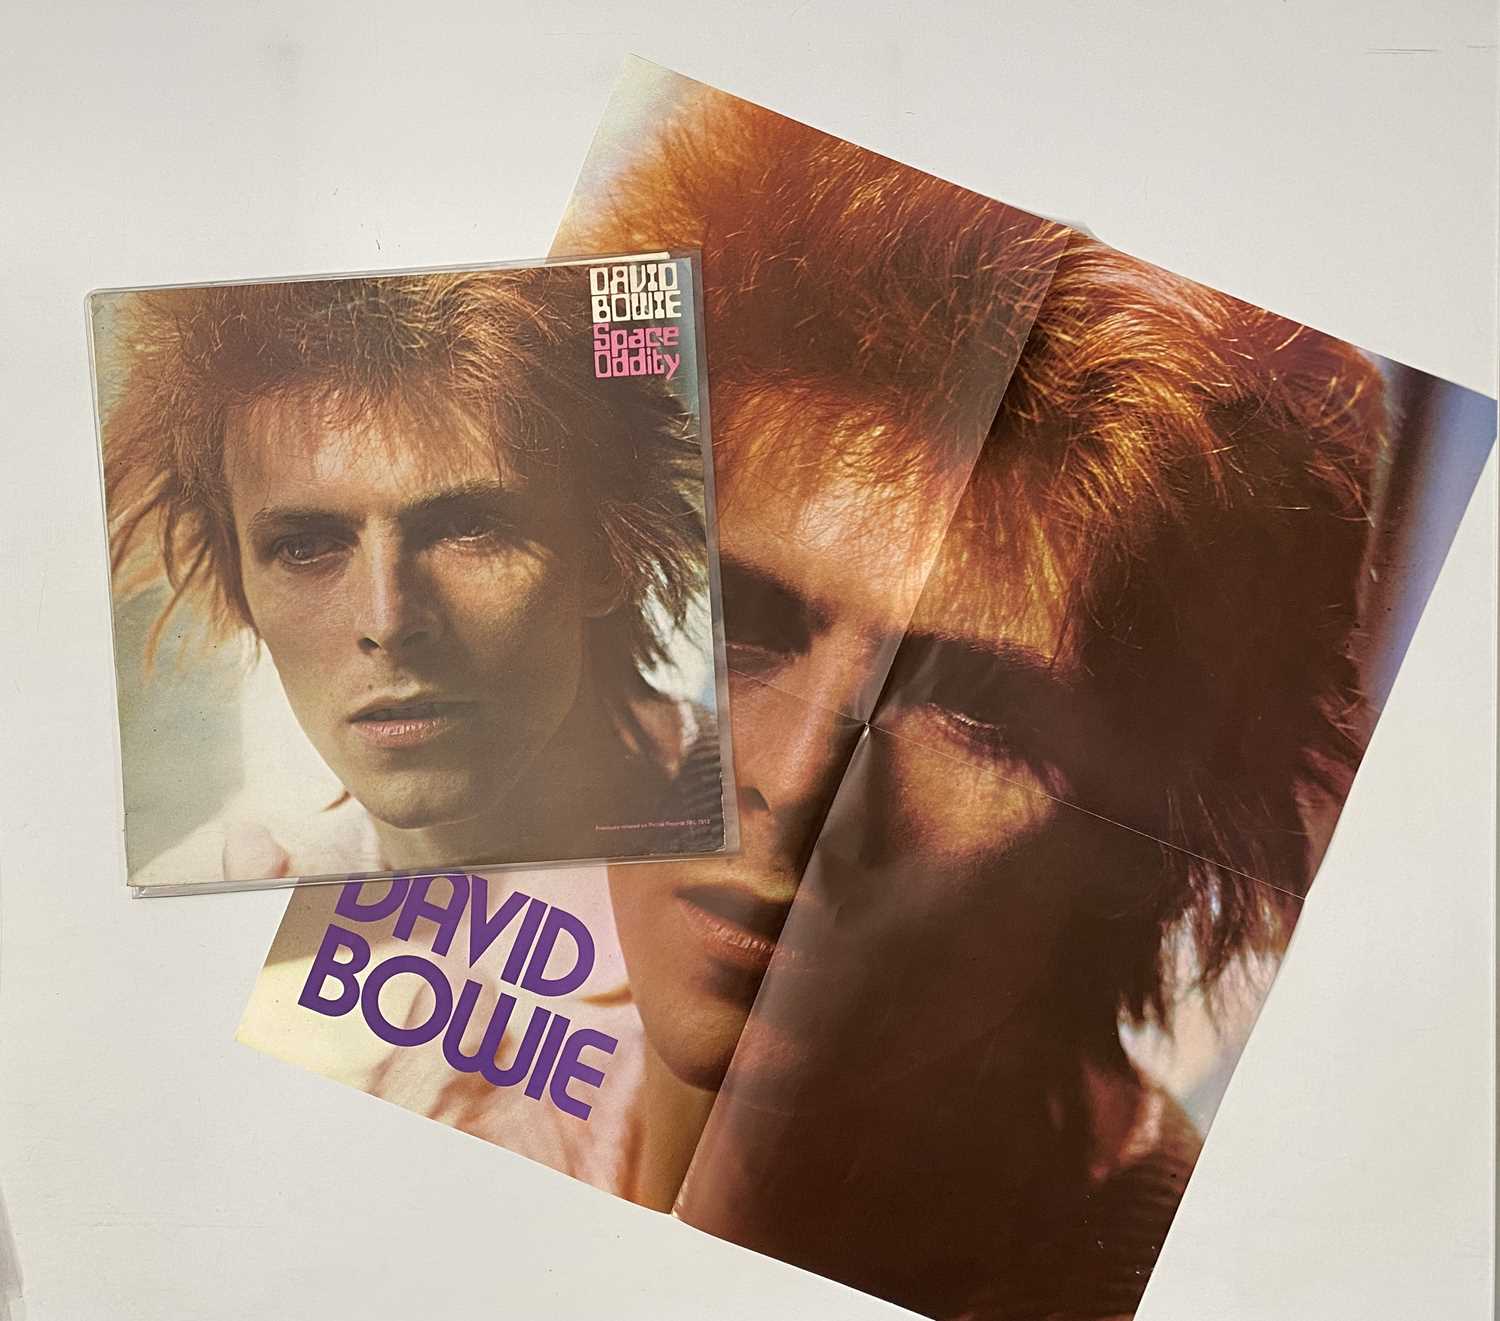 DAVID BOWIE - 'ULTIMATE' LP COLLECTION - Image 7 of 9